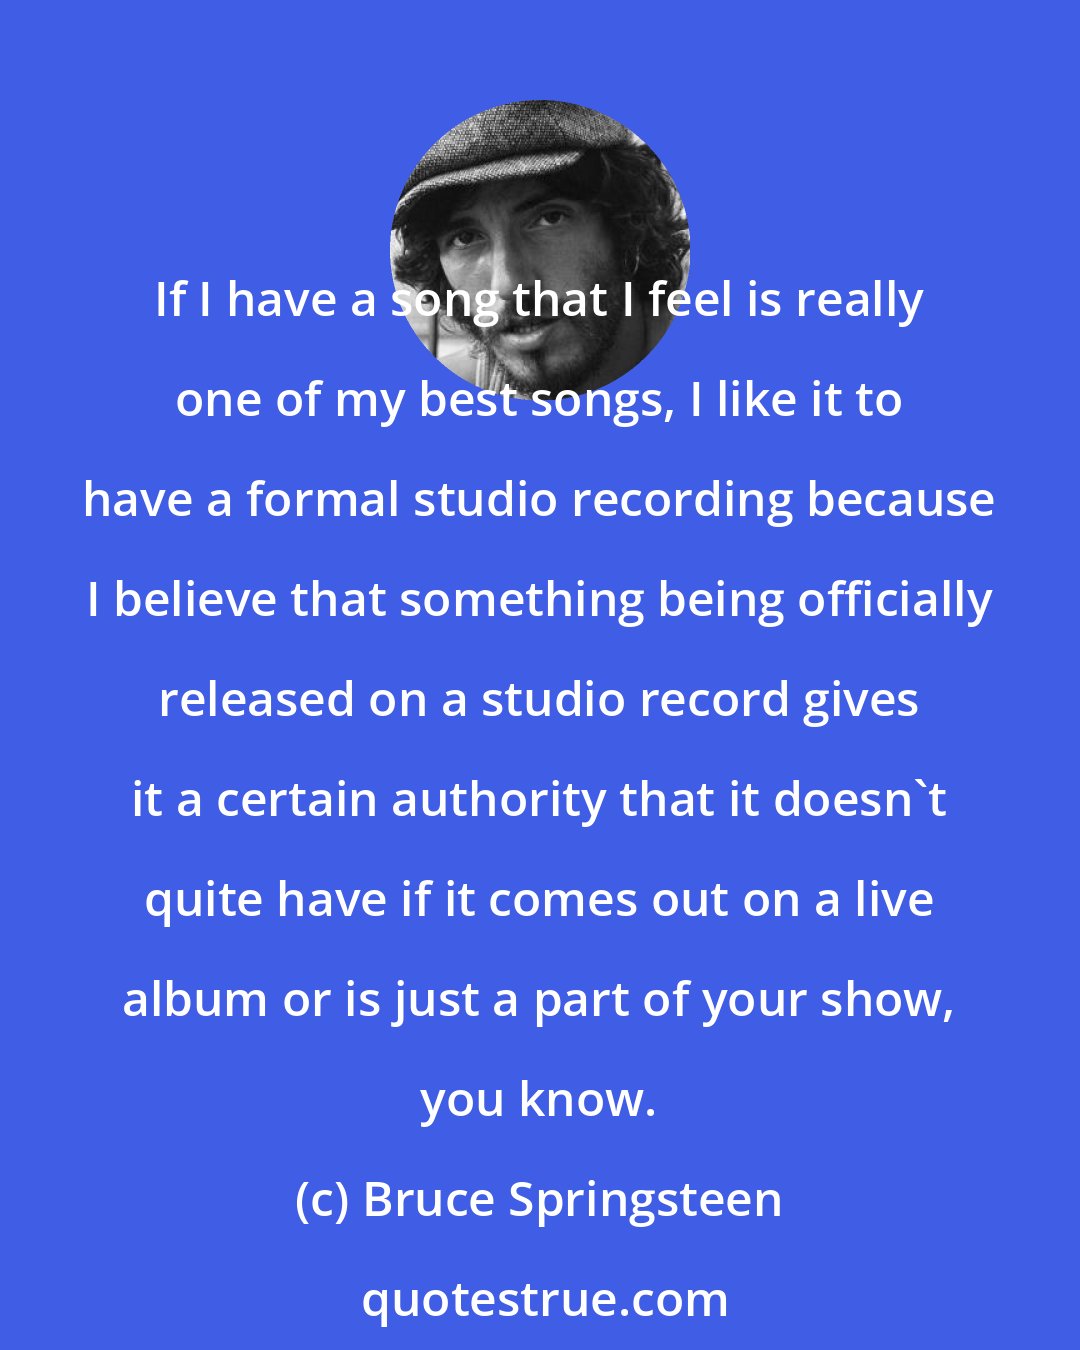 Bruce Springsteen: If I have a song that I feel is really one of my best songs, I like it to have a formal studio recording because I believe that something being officially released on a studio record gives it a certain authority that it doesn't quite have if it comes out on a live album or is just a part of your show, you know.